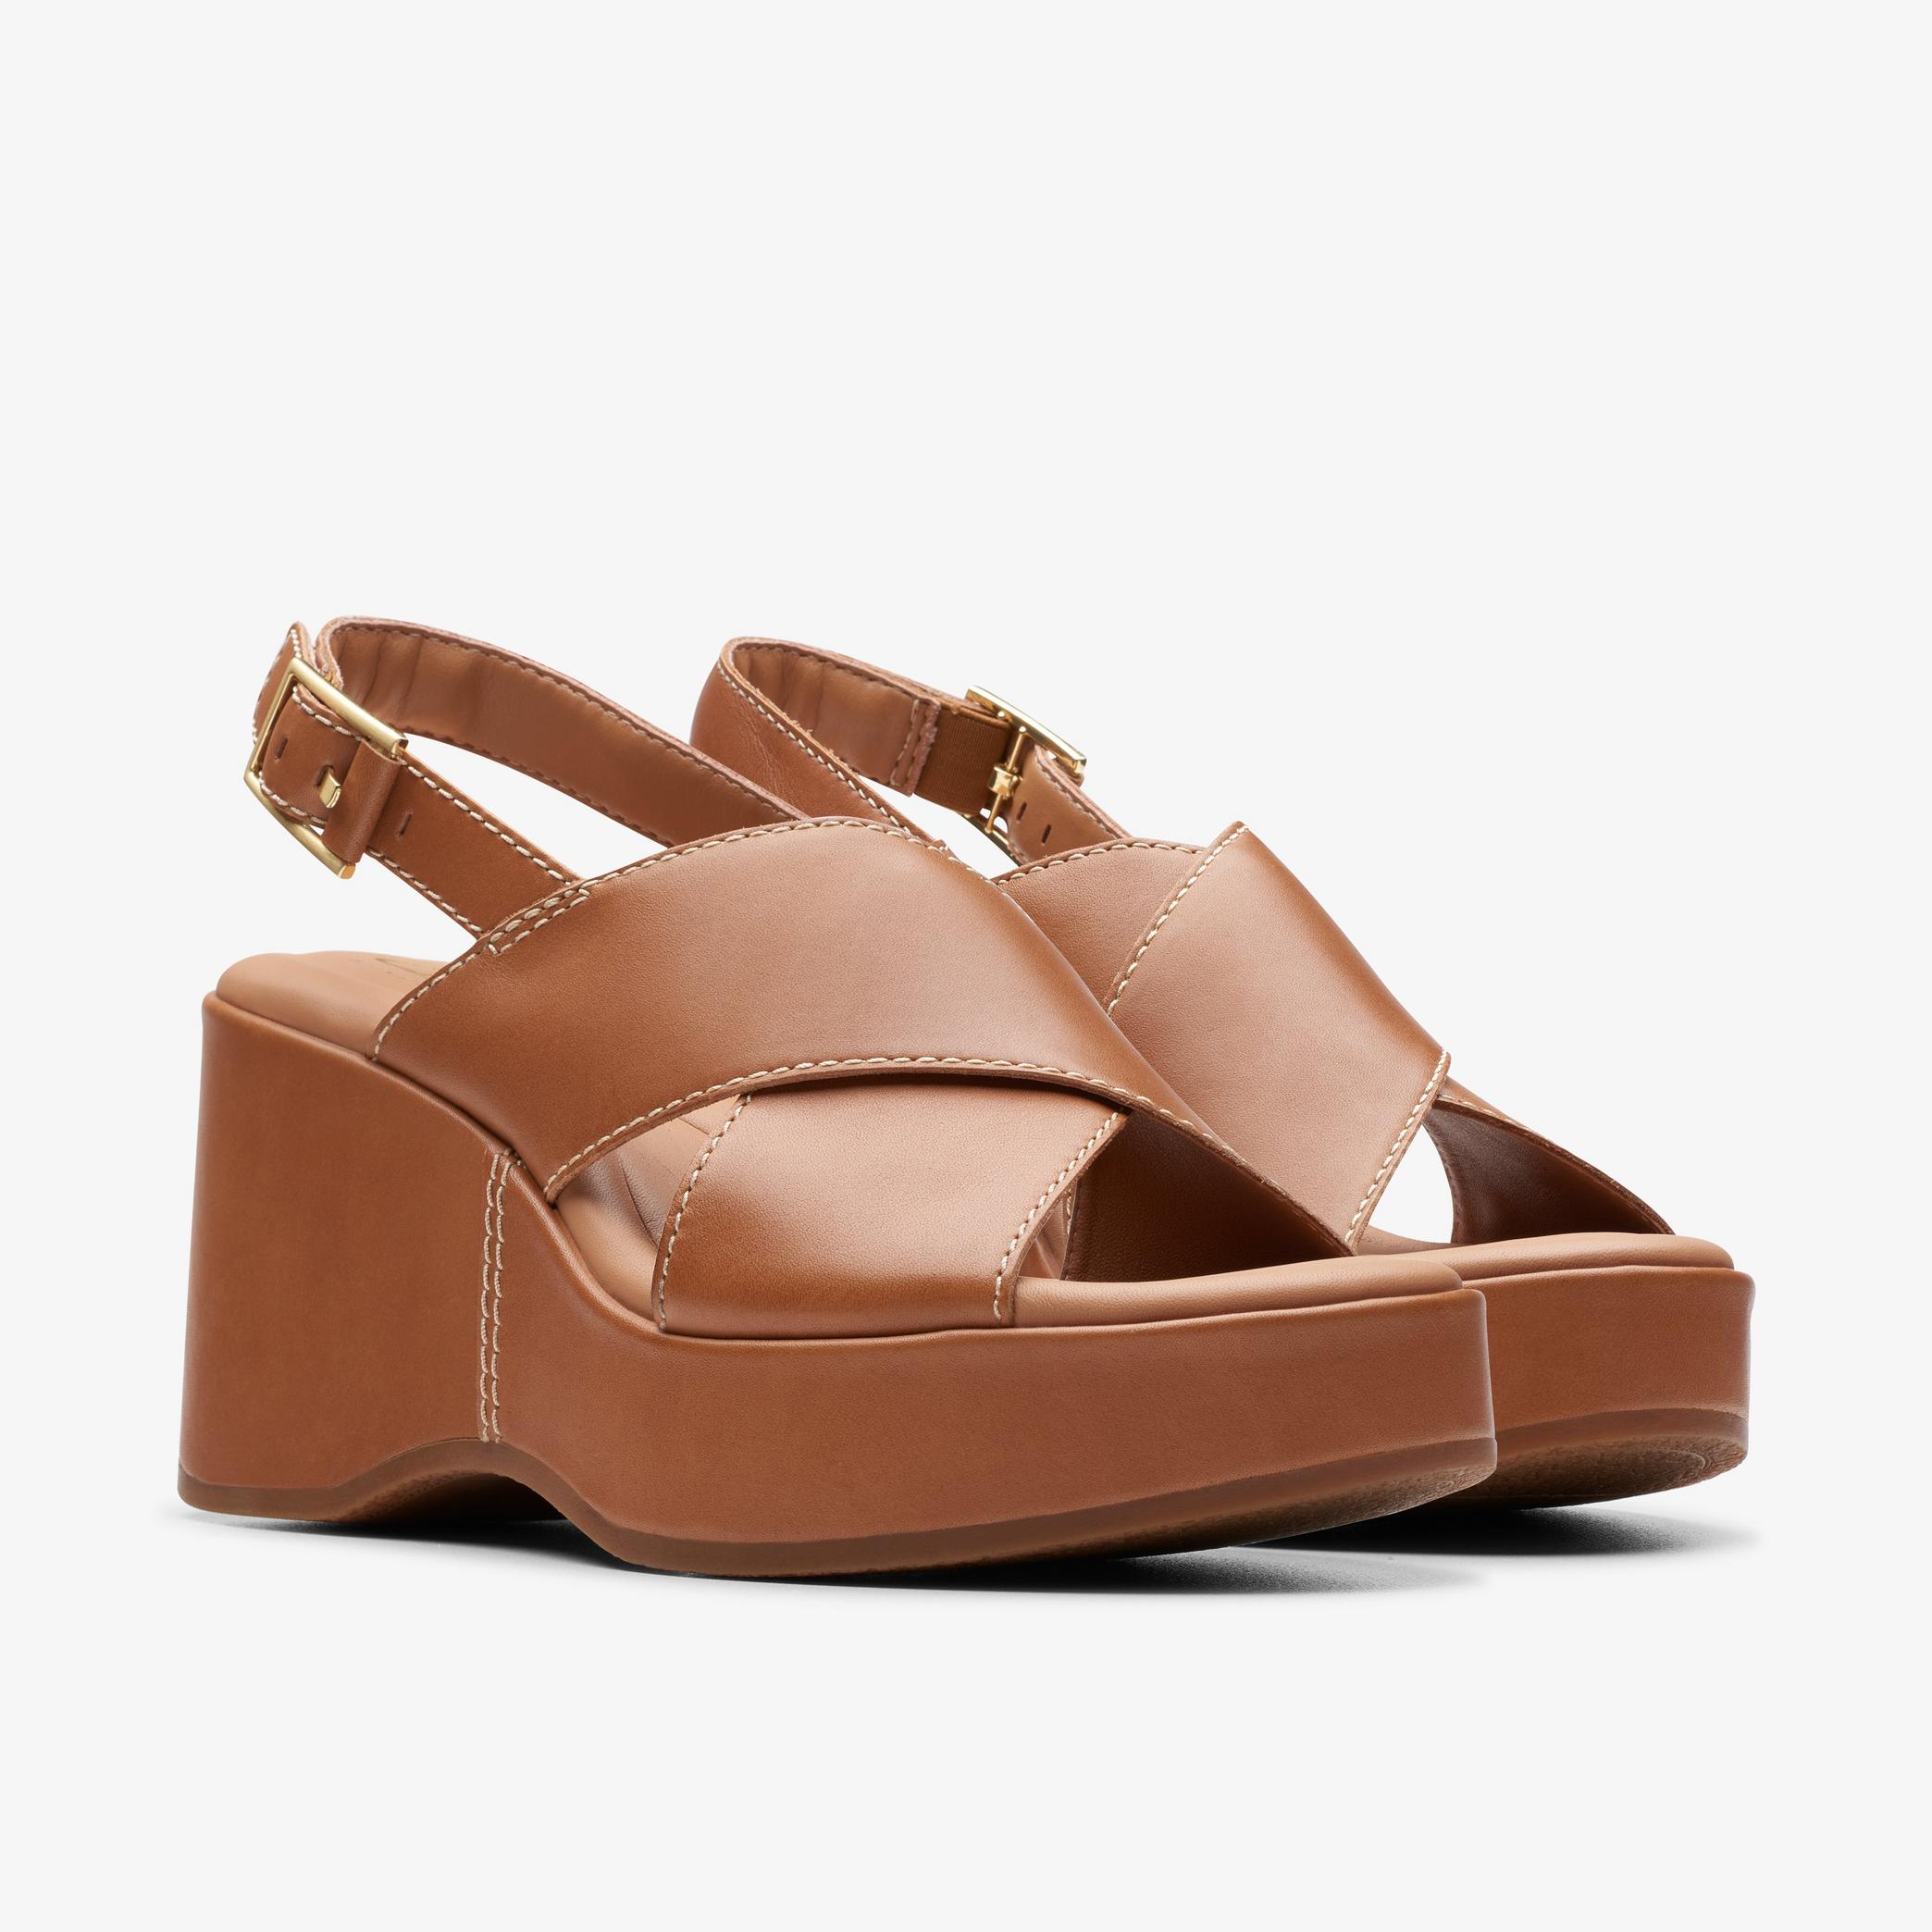 Manon Wish Tan Leather Heeled Sandals, view 4 of 6